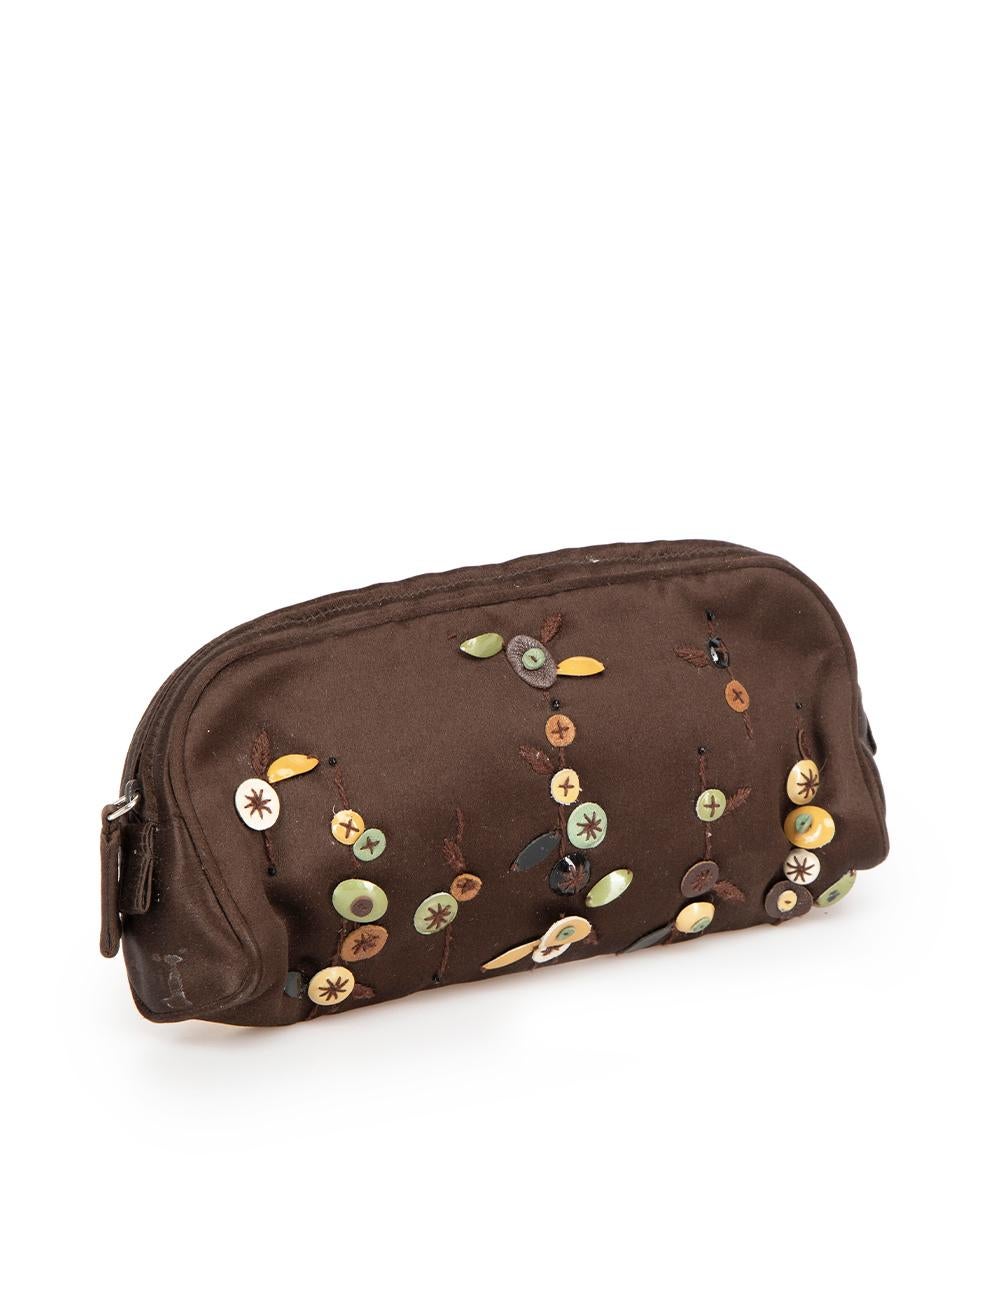 CONDITION is Good. General wear to pouch is evident. Moderate signs of wear to lining and embroidery detail where some stitching has frayed on this used Prada designer resale item.



Details


Vintage

Brown

Satin

Mini pouch

Embroidered and